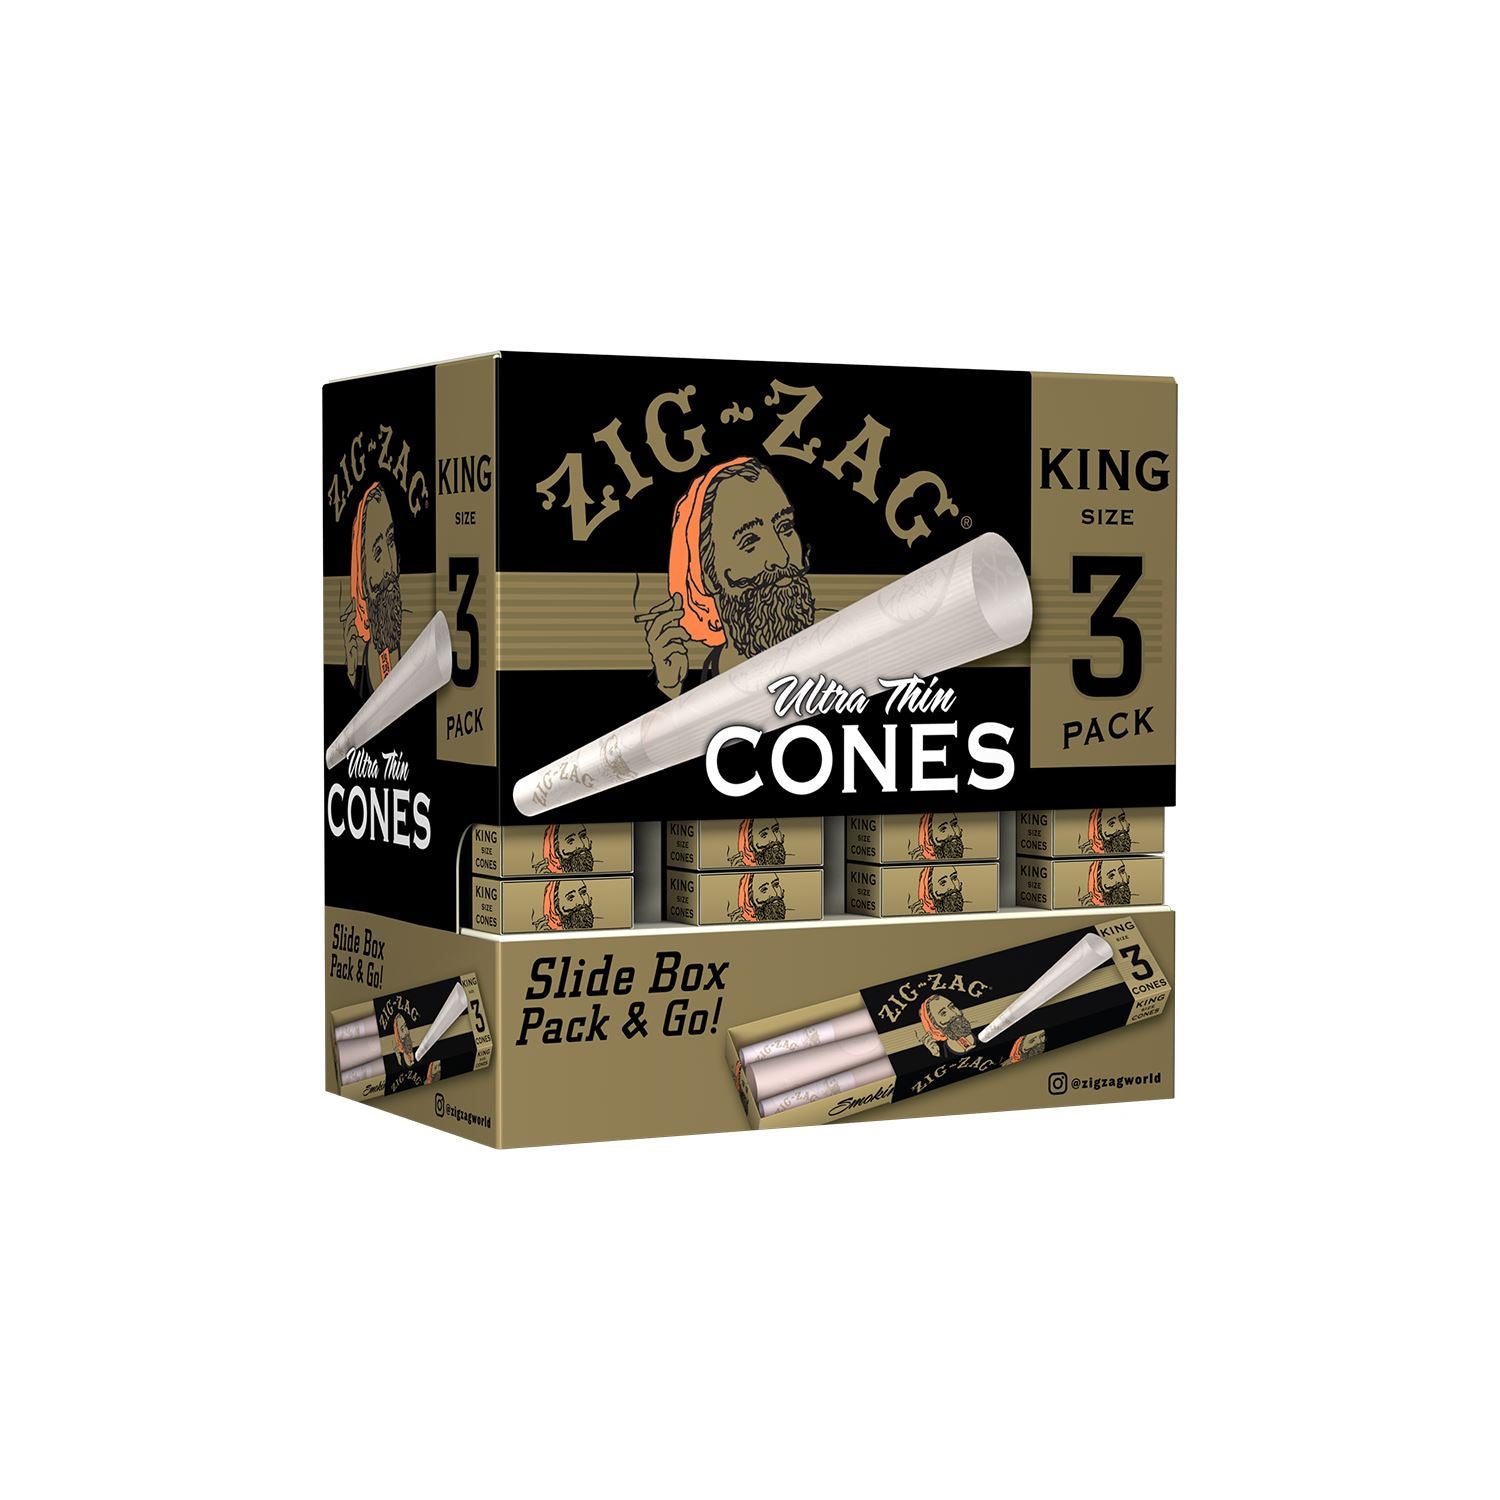 Zig Zag Promo Display (36 Pack Per Display) 3 Cones Per pack - King Size Cones (1 Count) Flower Power Packages 